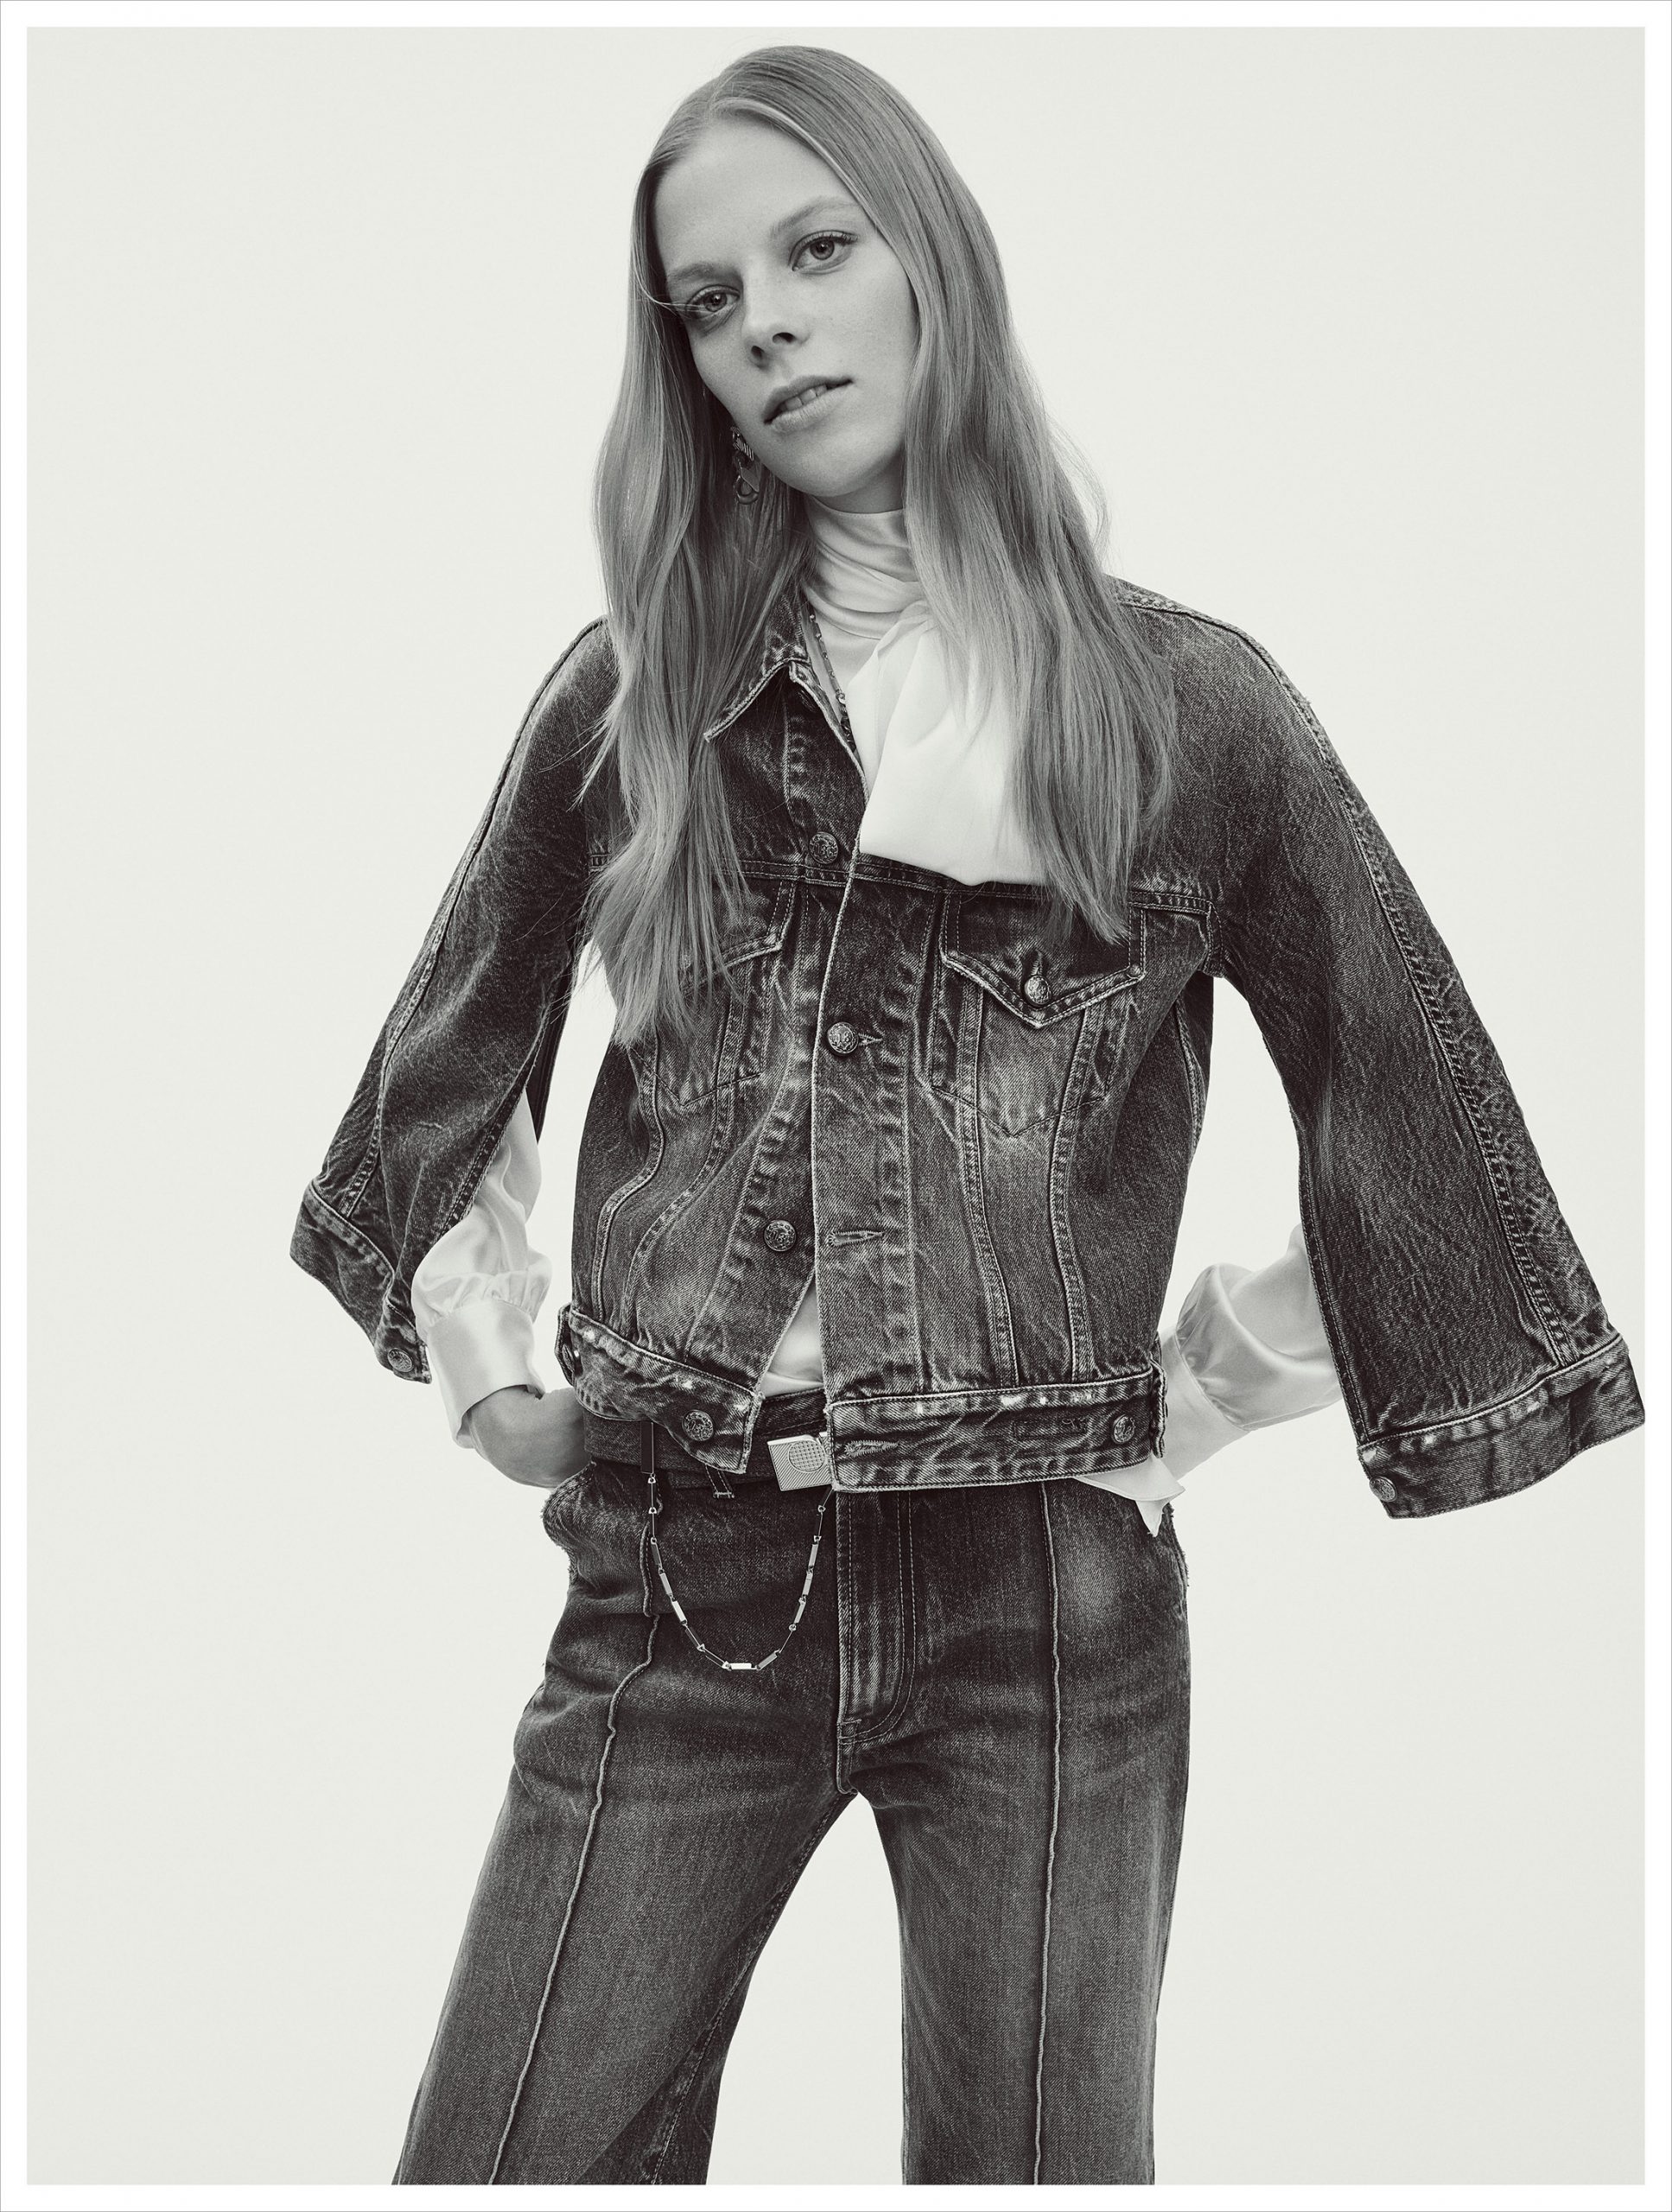 Ports 1961 teams with R13 on denim capsule collection | The Impression